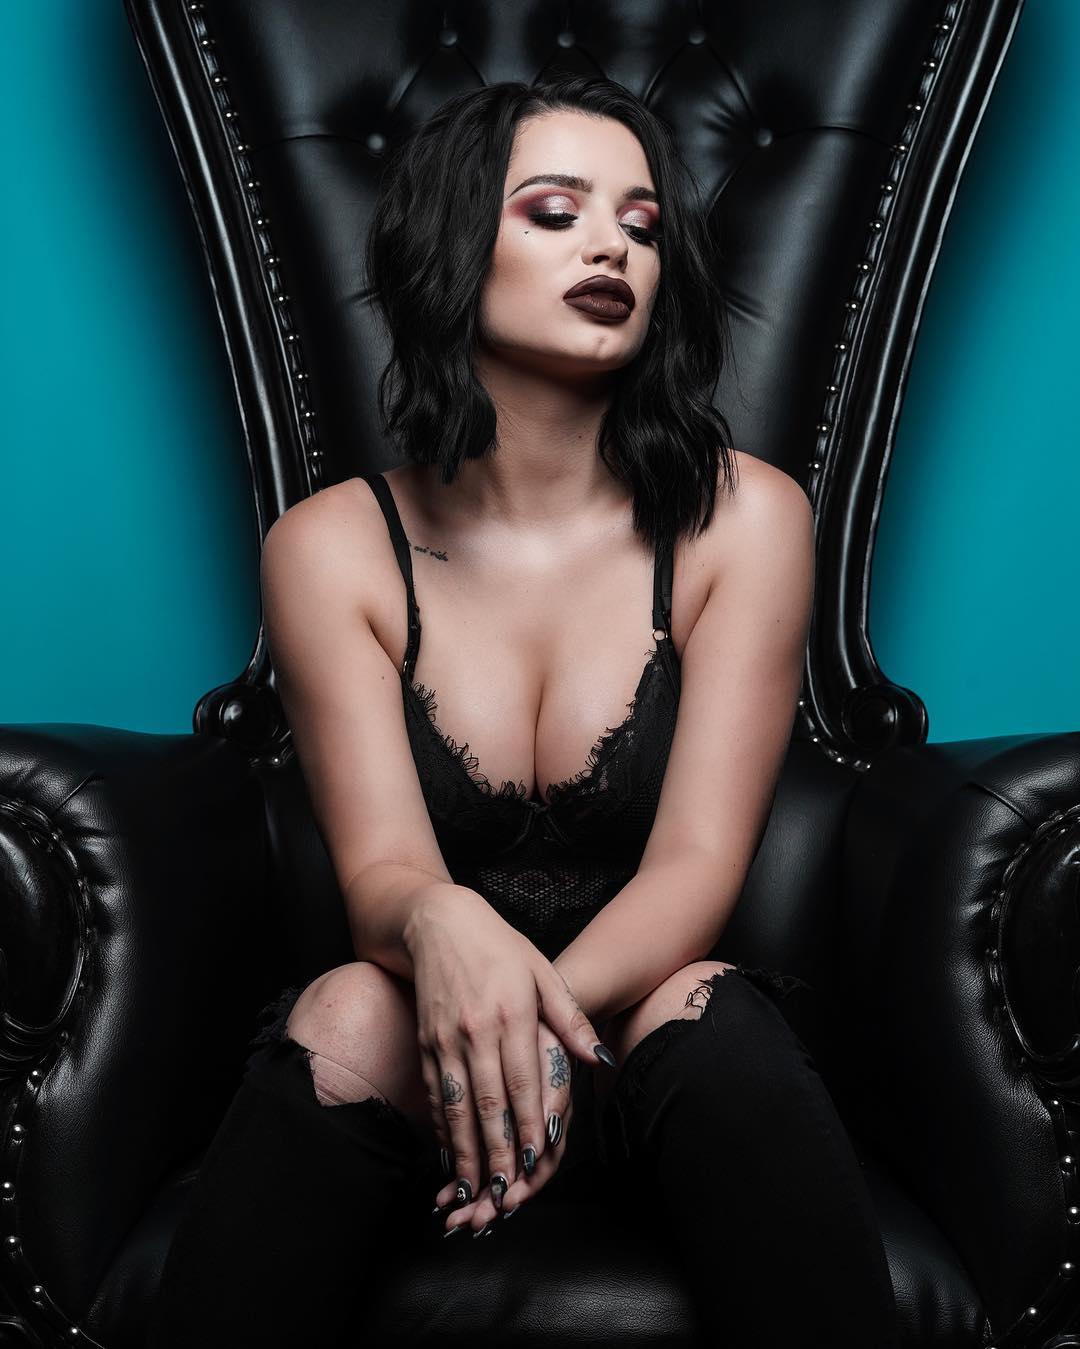 paige hot boobs